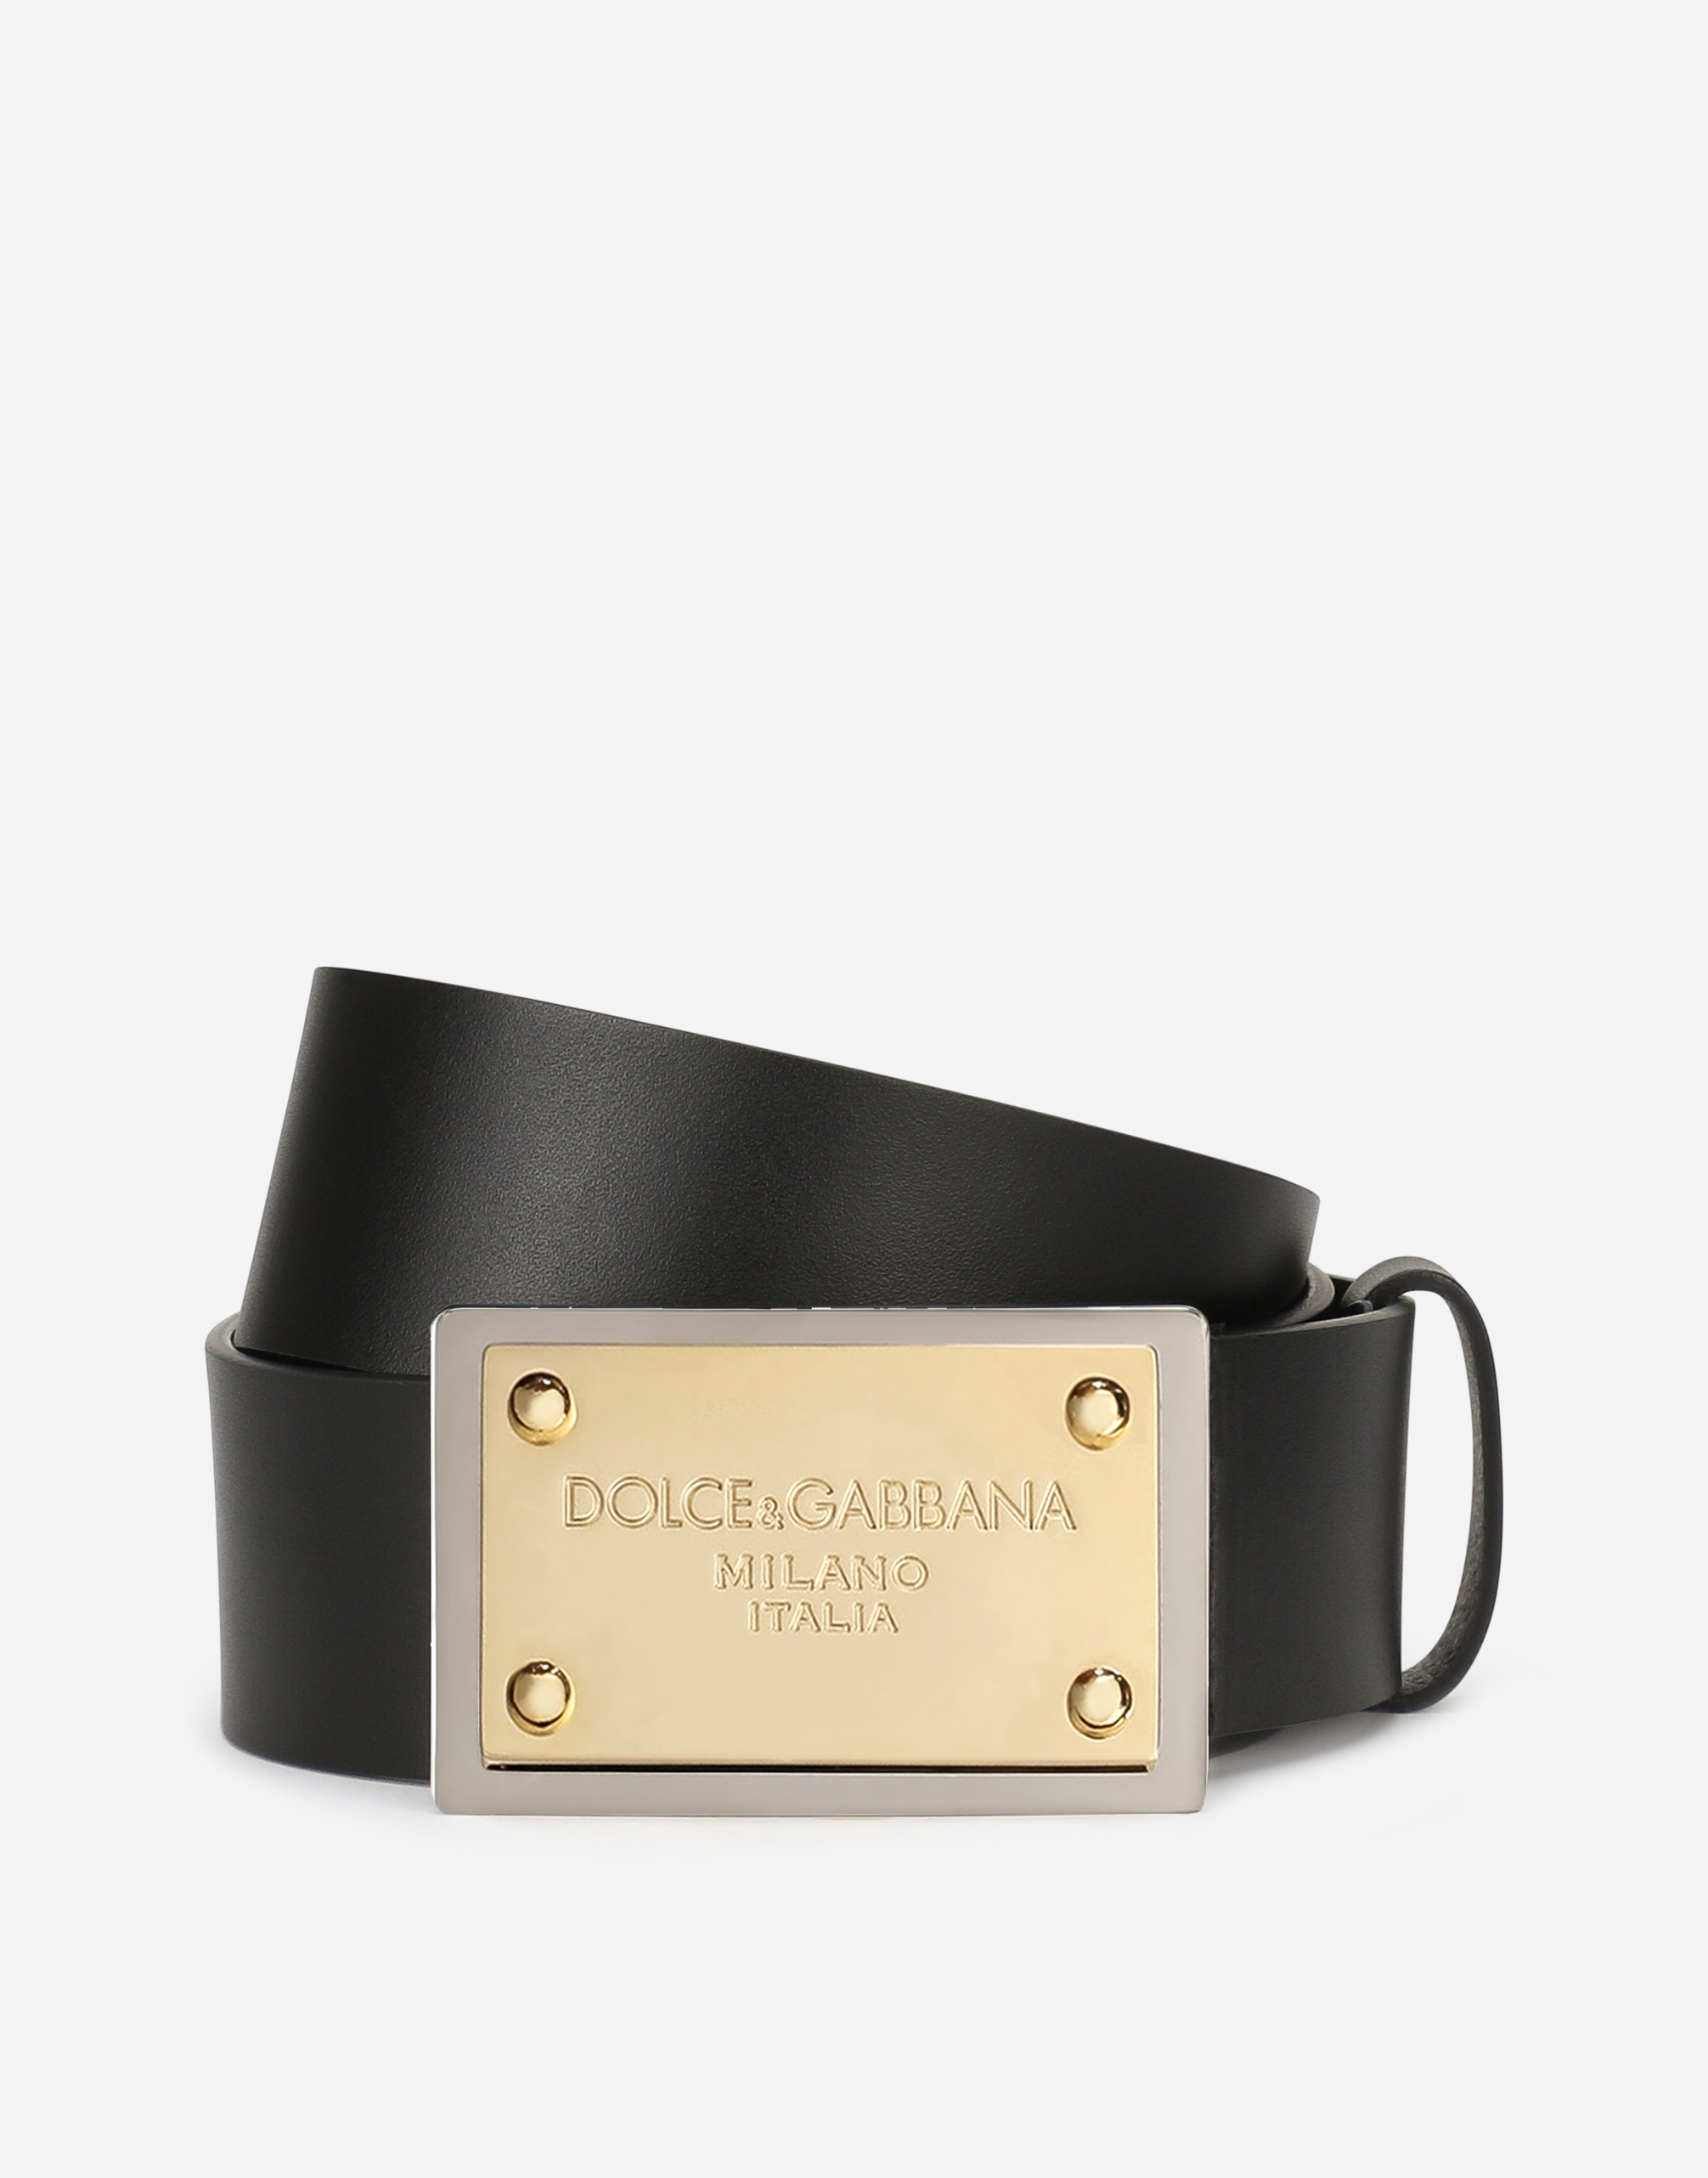 Lux leather belt with branded buckle in Black